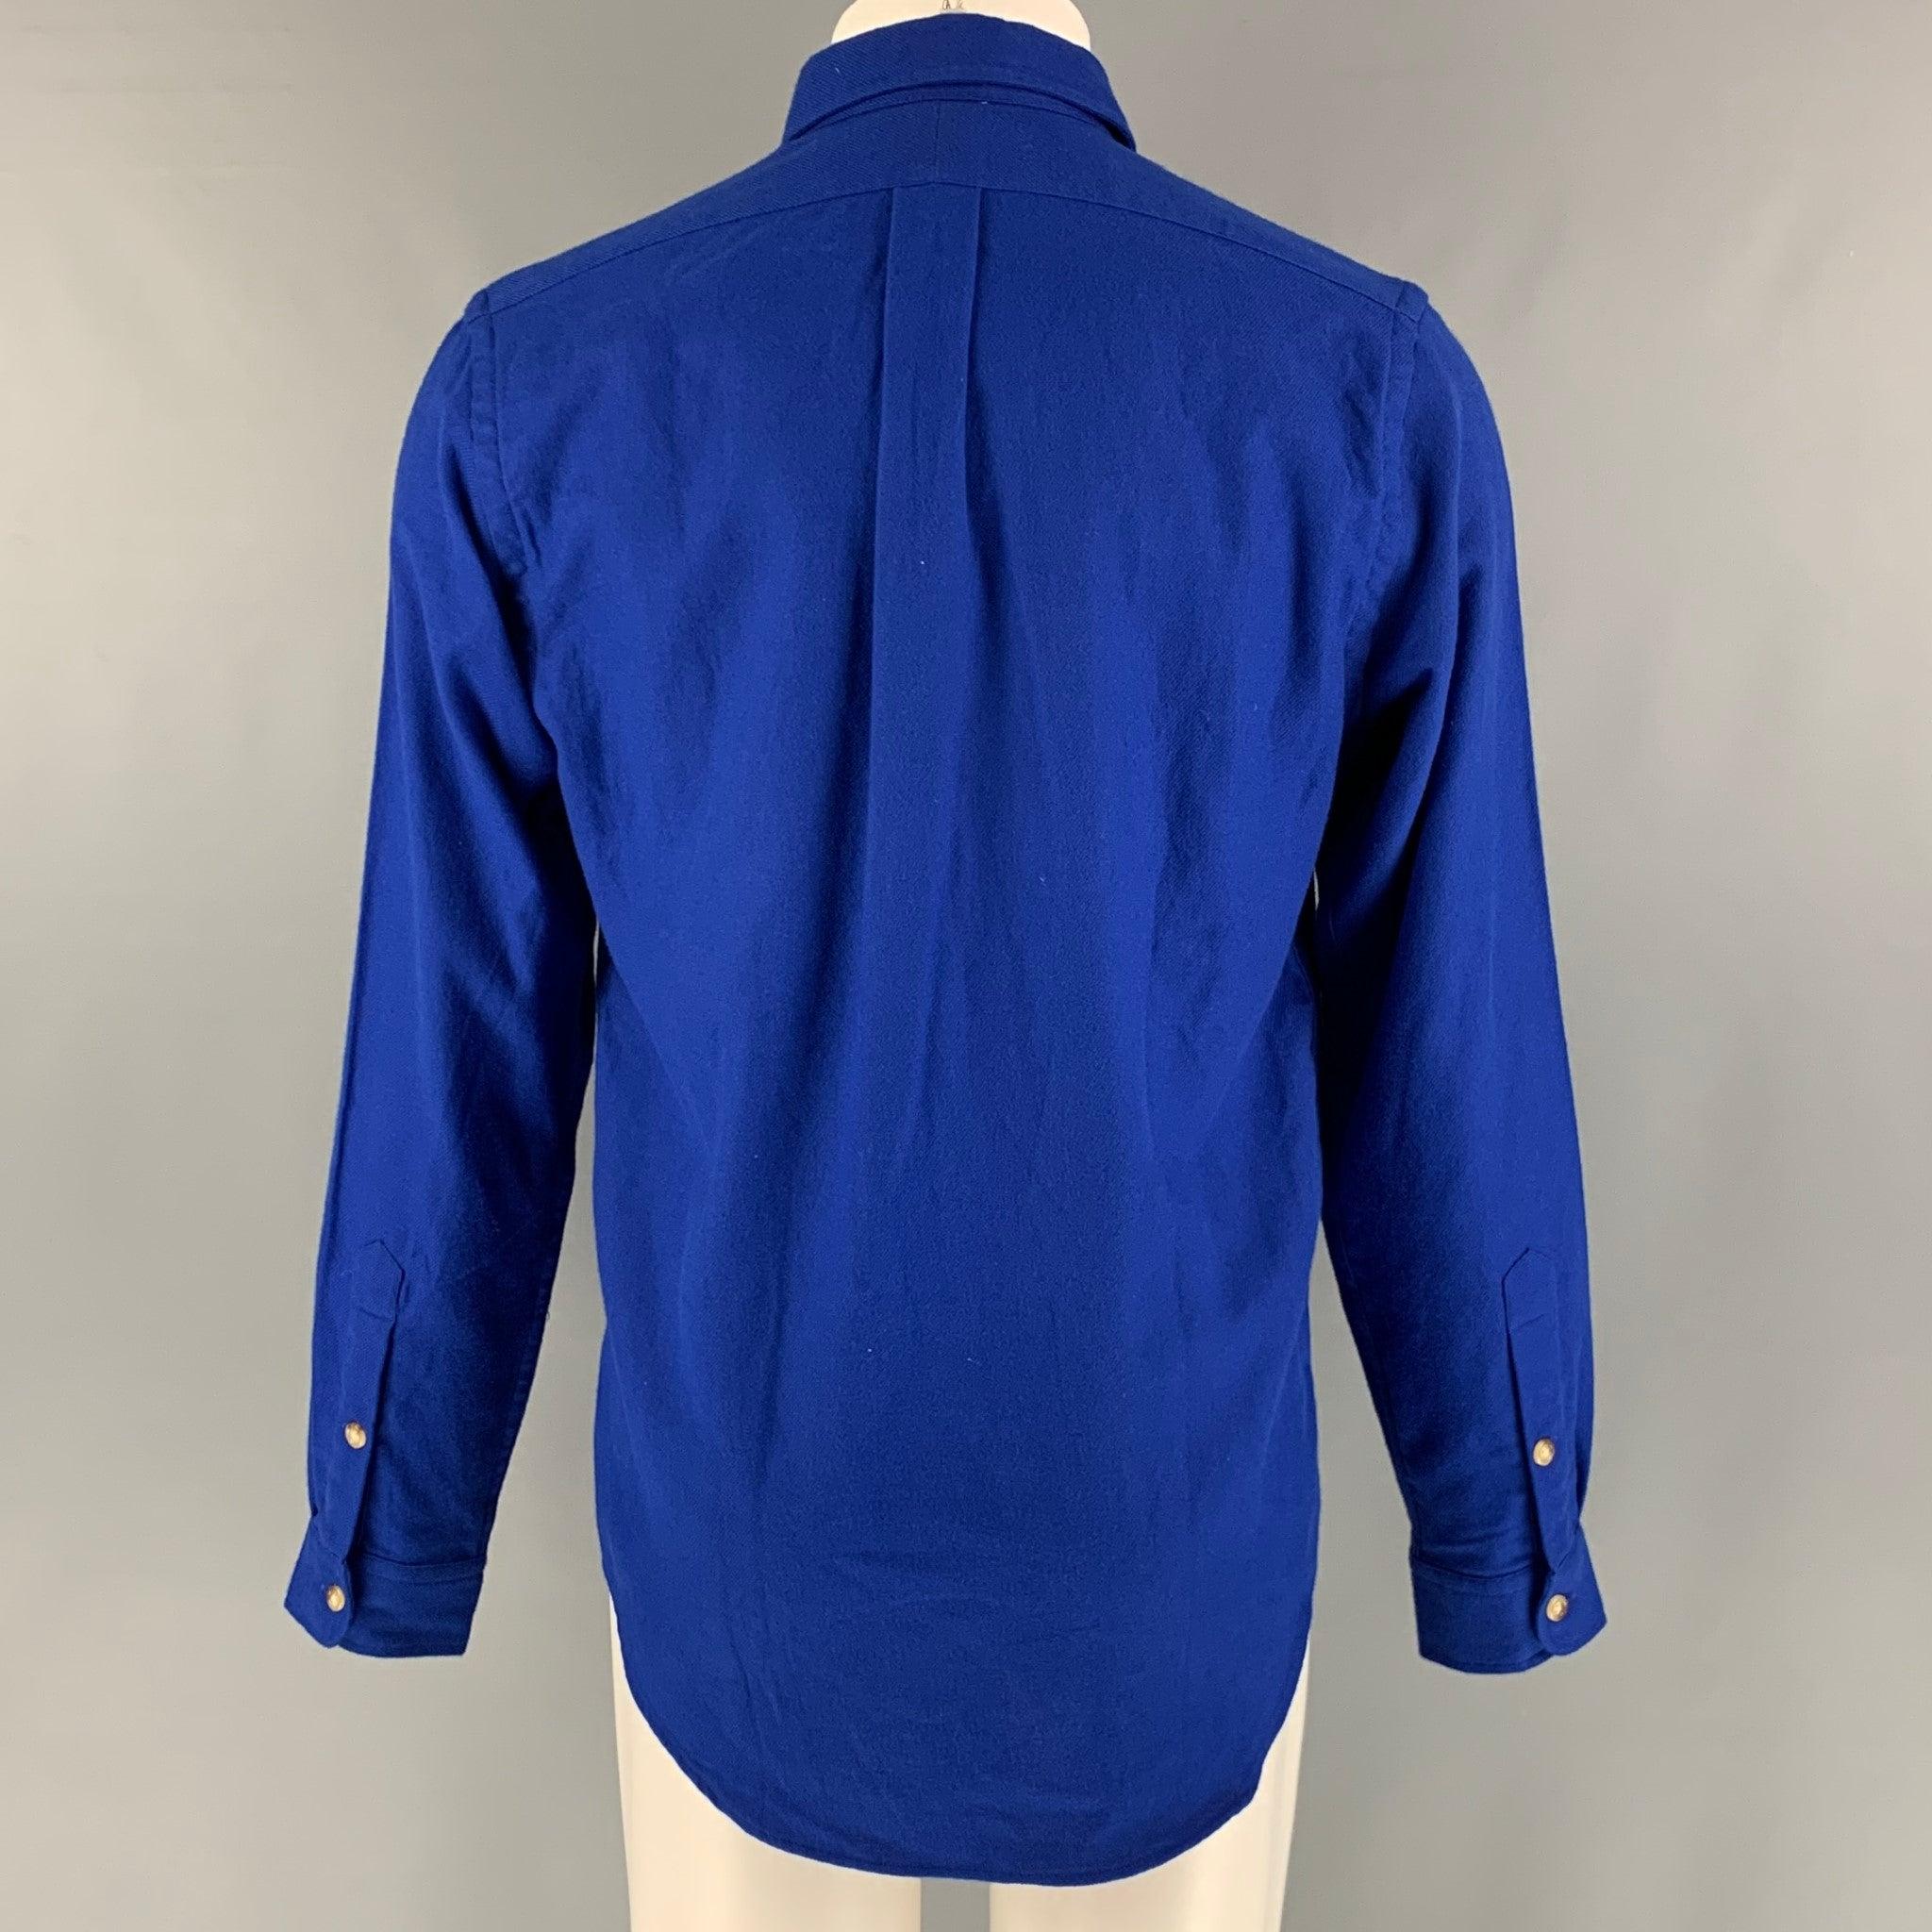 RALPH LAUREN Size M Royal Blue Solid Cotton Patch Pockets Long Sleeve Shirt In Excellent Condition For Sale In San Francisco, CA